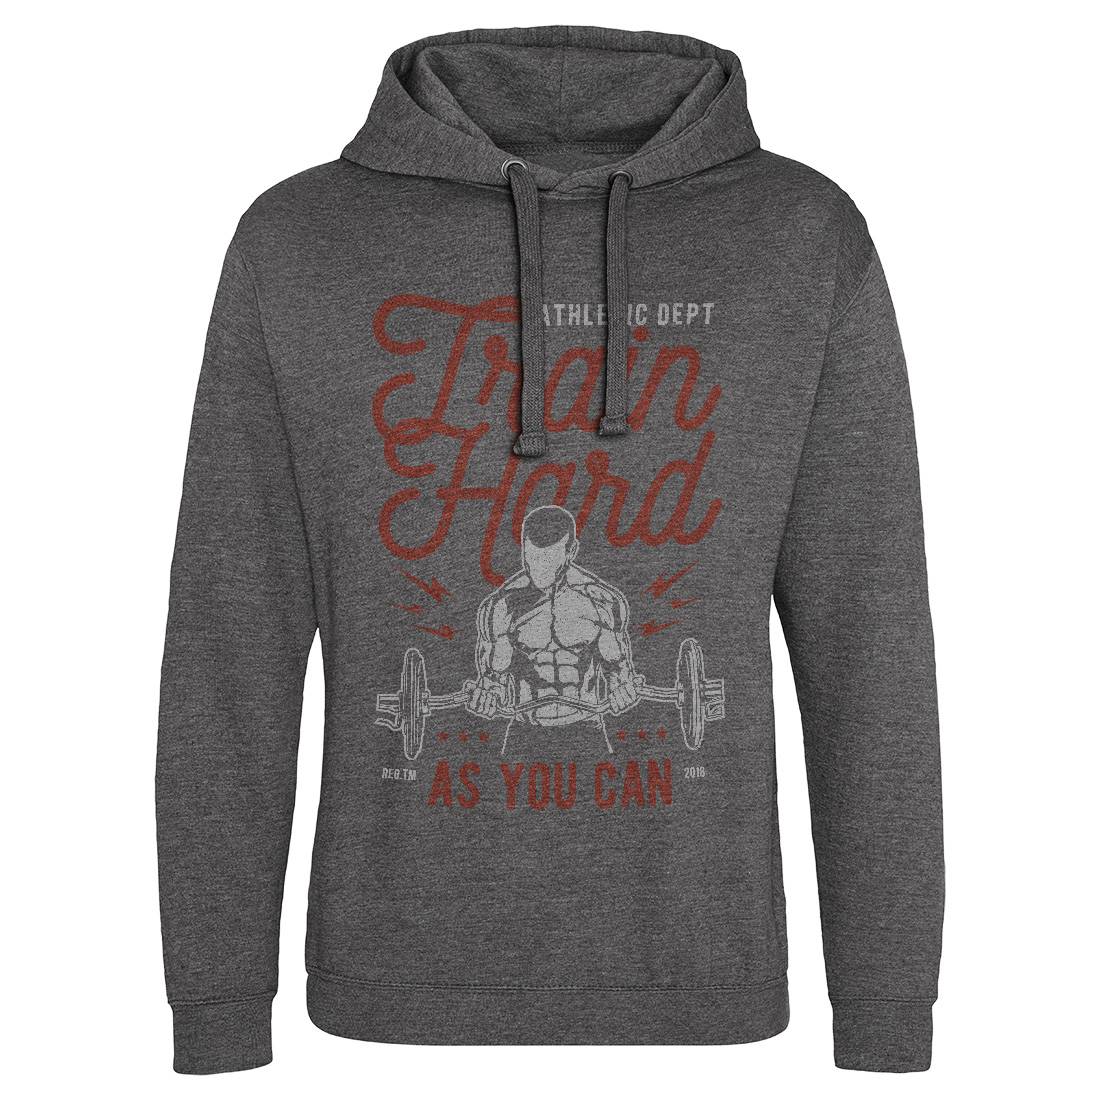 Train Hard Mens Hoodie Without Pocket Gym A778